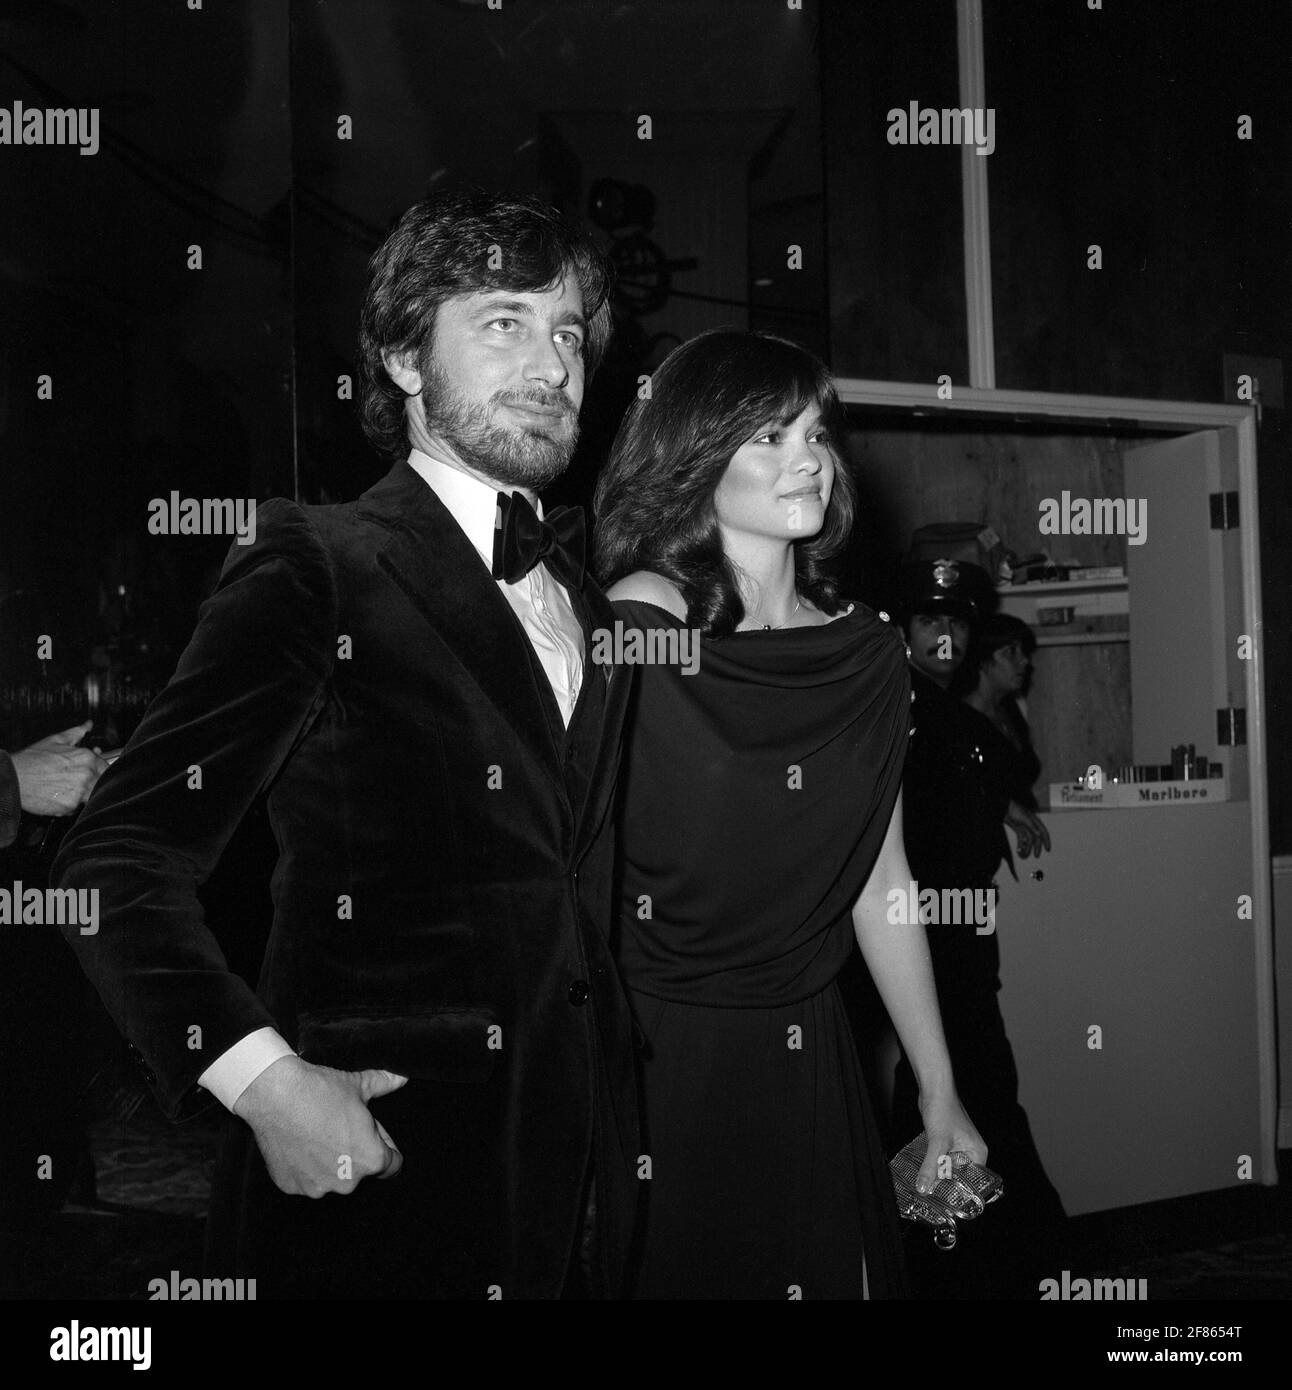 Valerie bertinelli 1980s Black and White Stock Photos & Images - Alamy